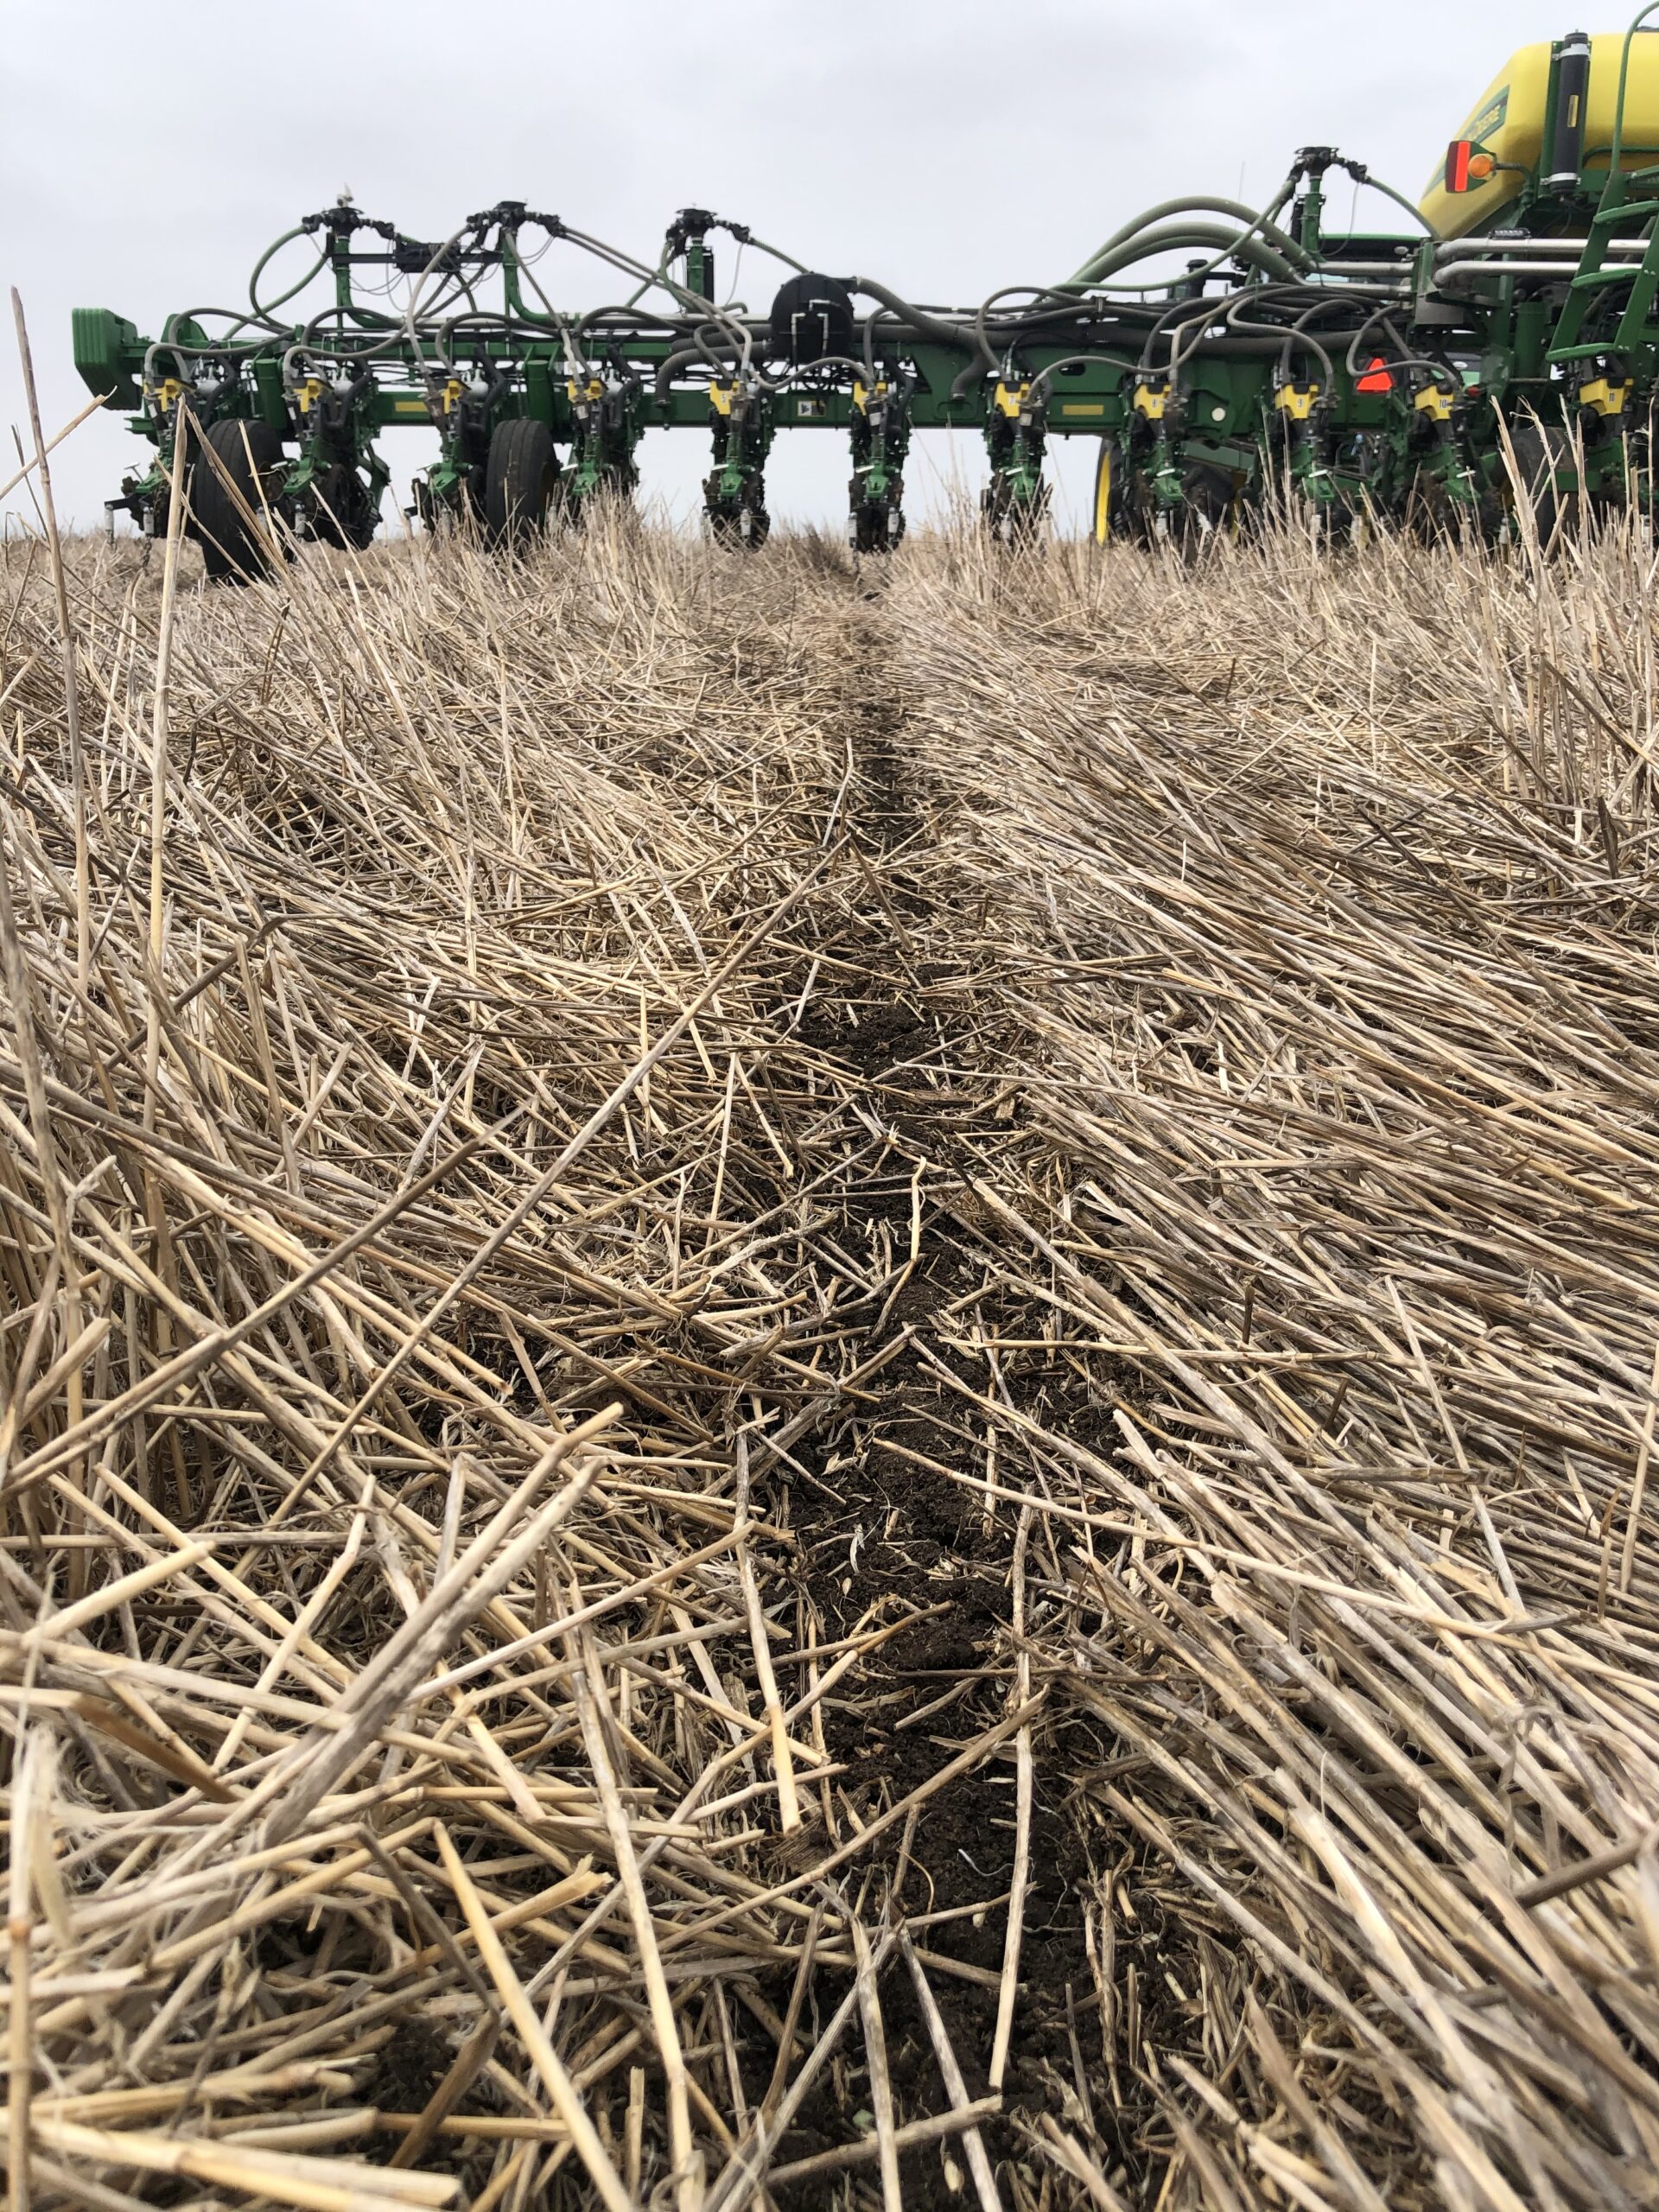 Cronin Farms plants directly into stubble left by their small grain crops. This crop residue protects the soil, aids moisture retention, and builds soil organic matter. Courtesy photo.